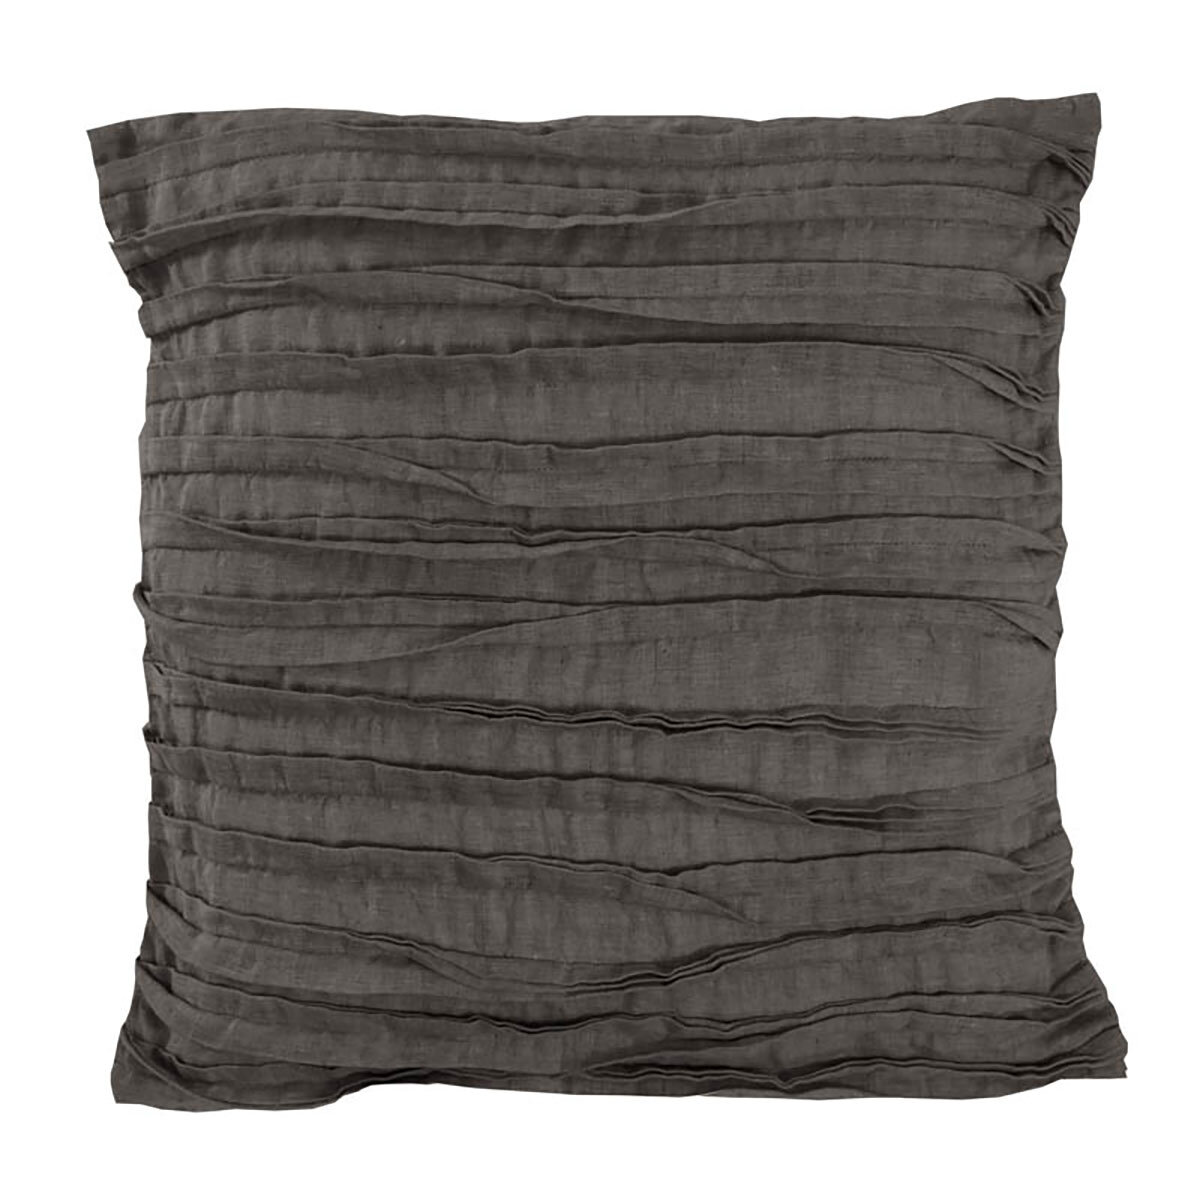 Lazy Linen 100% Washed Linen Cushion 2 Pack in Charcoal 